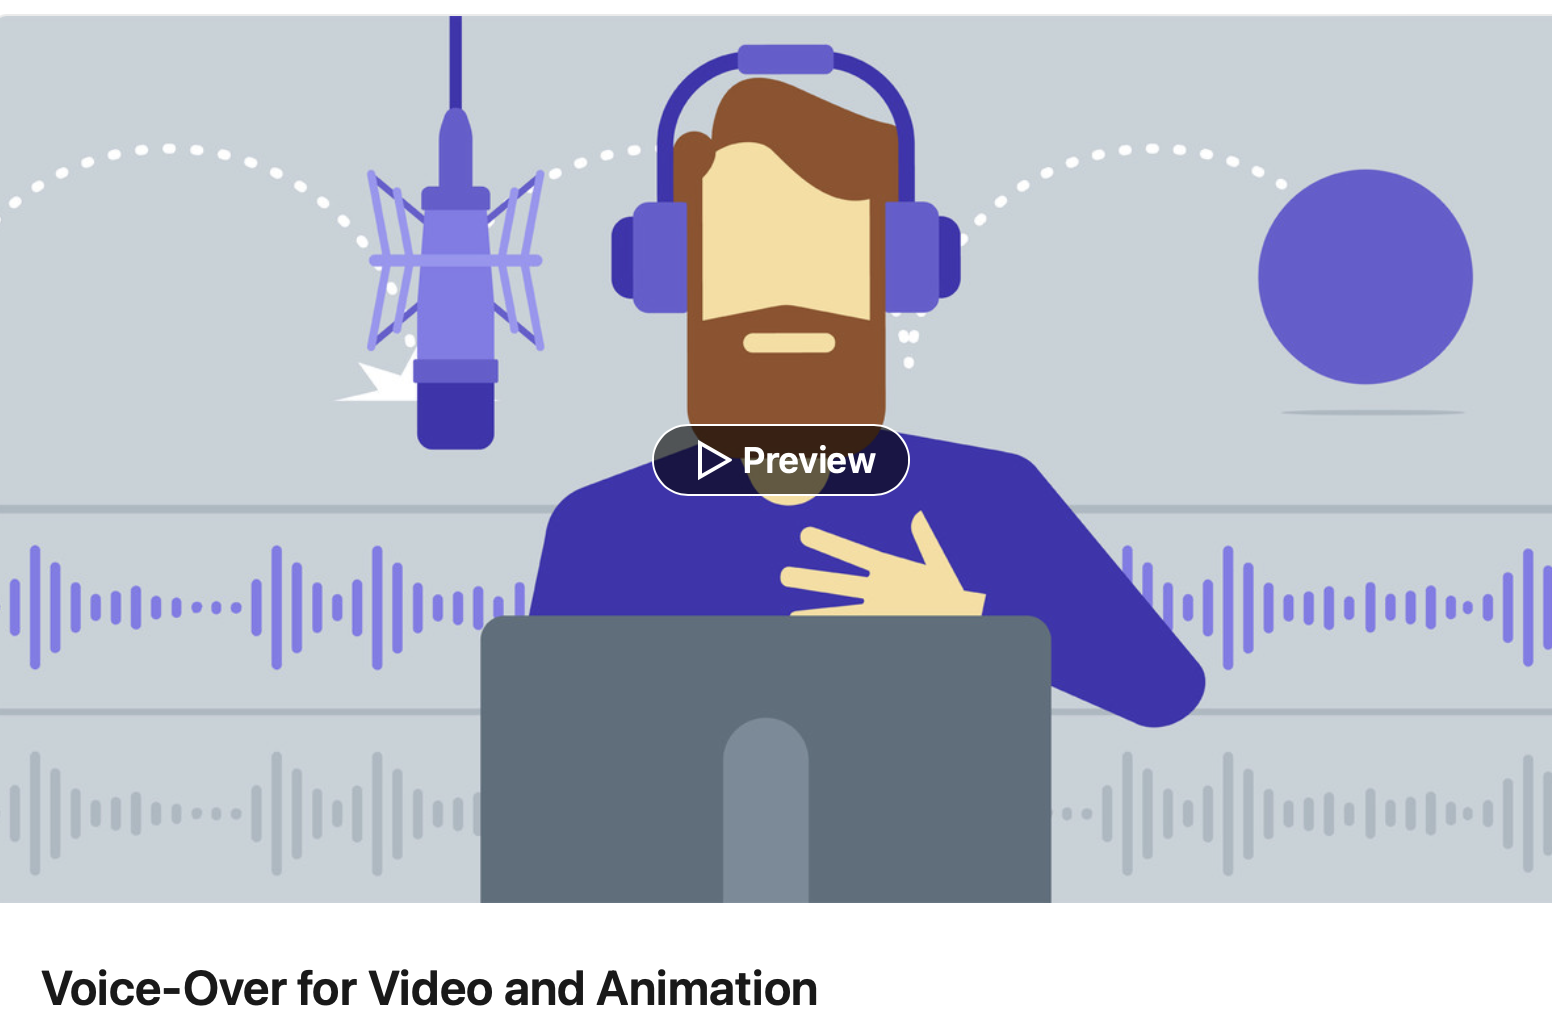 Voiceover for Video and Animation